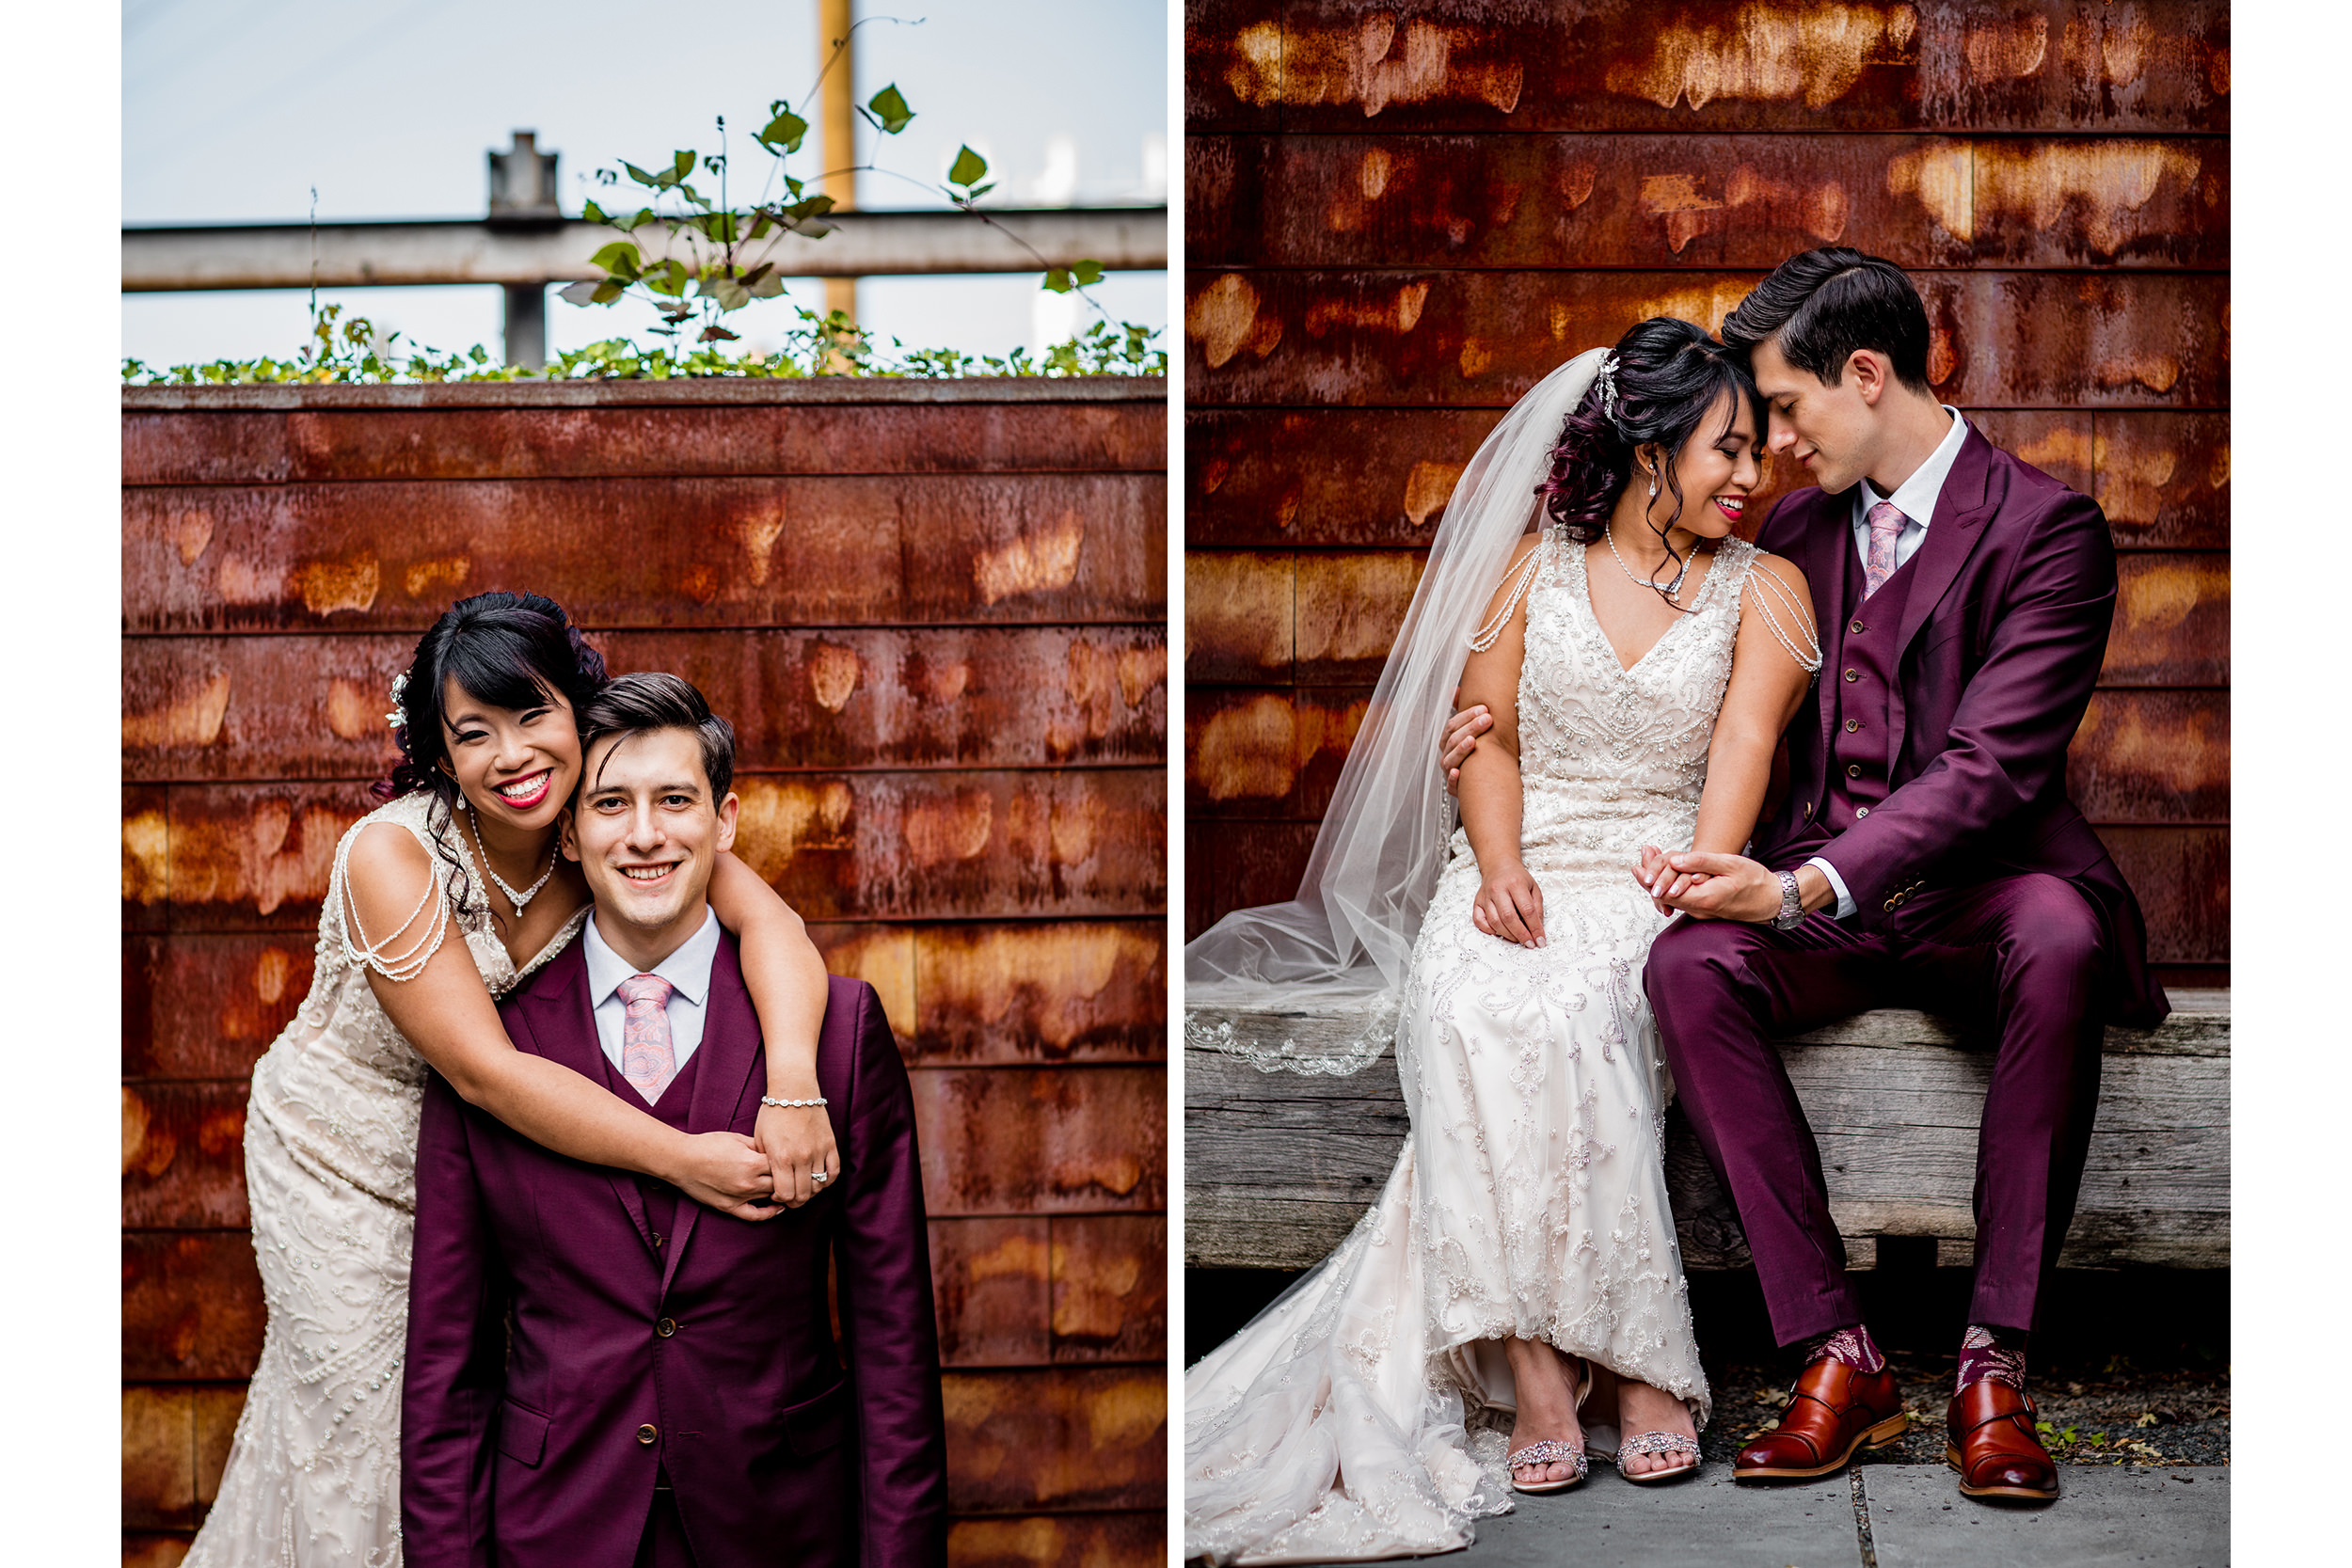 Couple portraits during a wedding at the Joinery.